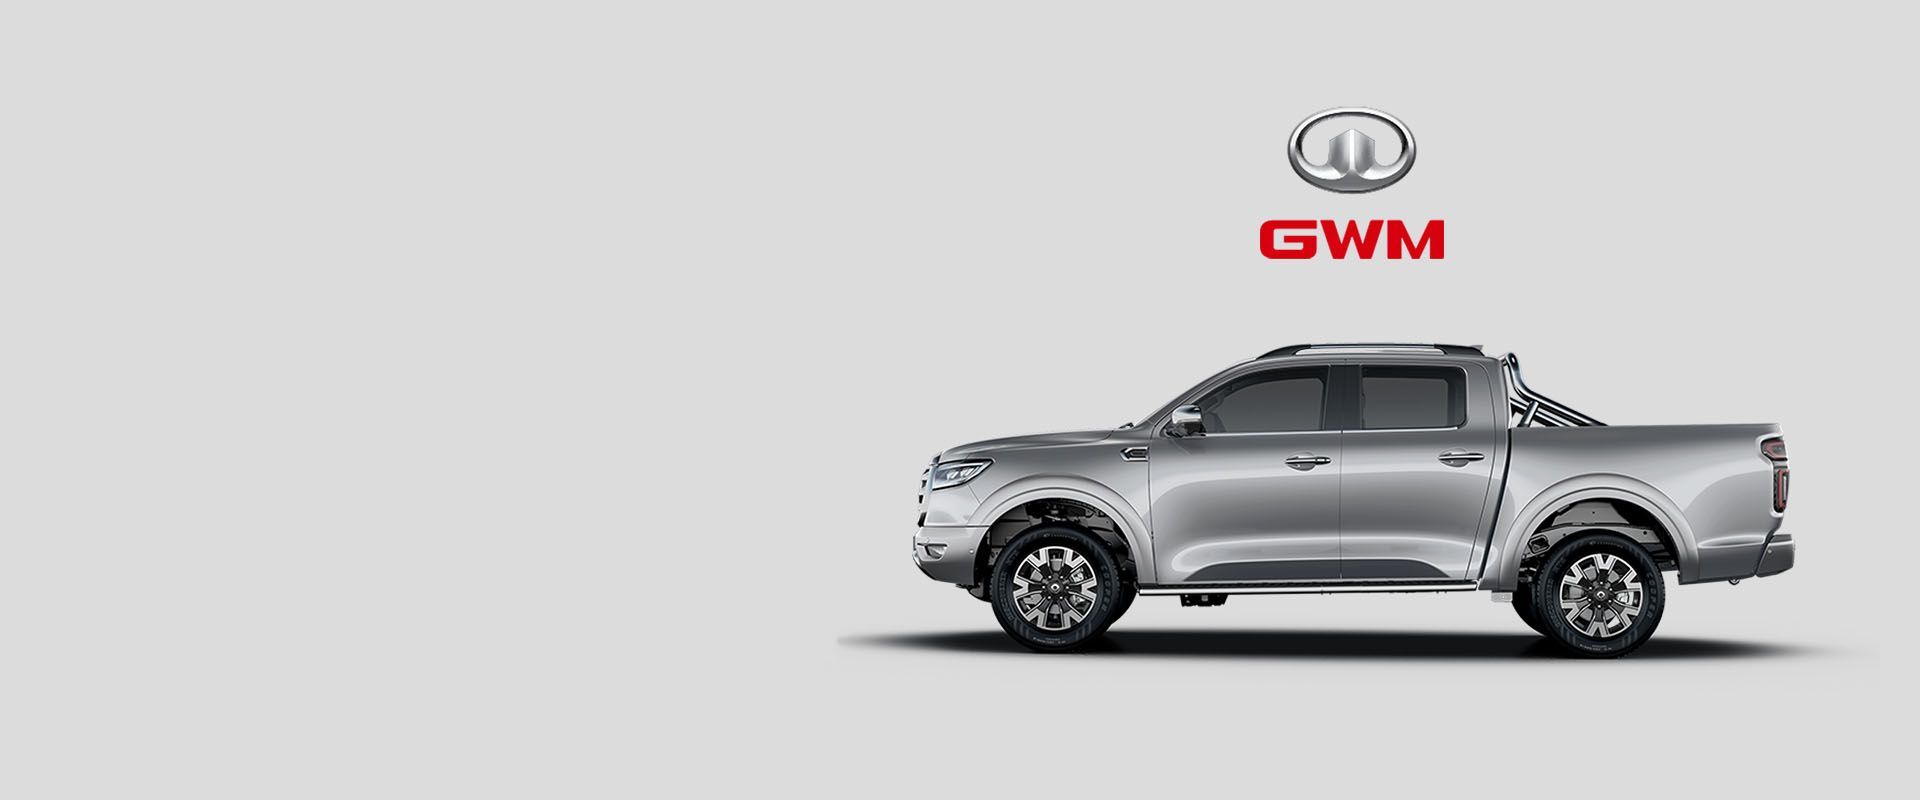 GWM/Haval Cannon 4x2 from Norton Motor Group